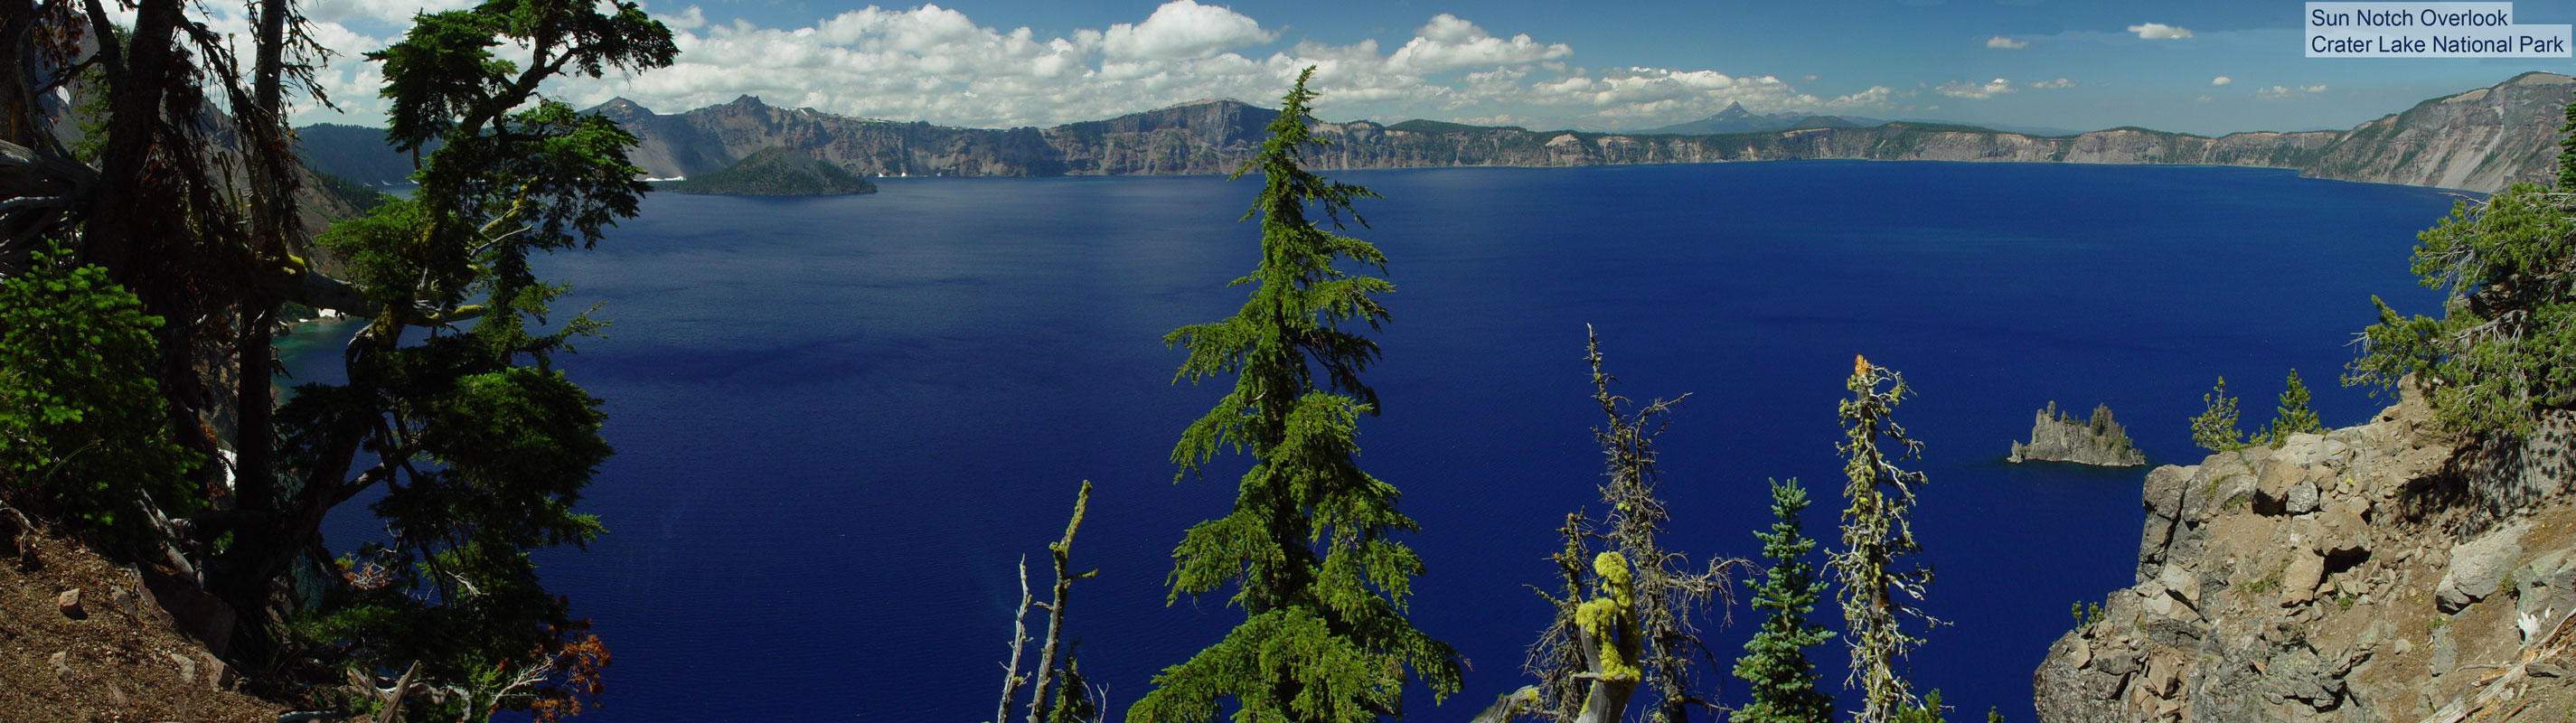 Crater Lake from Sun Notch